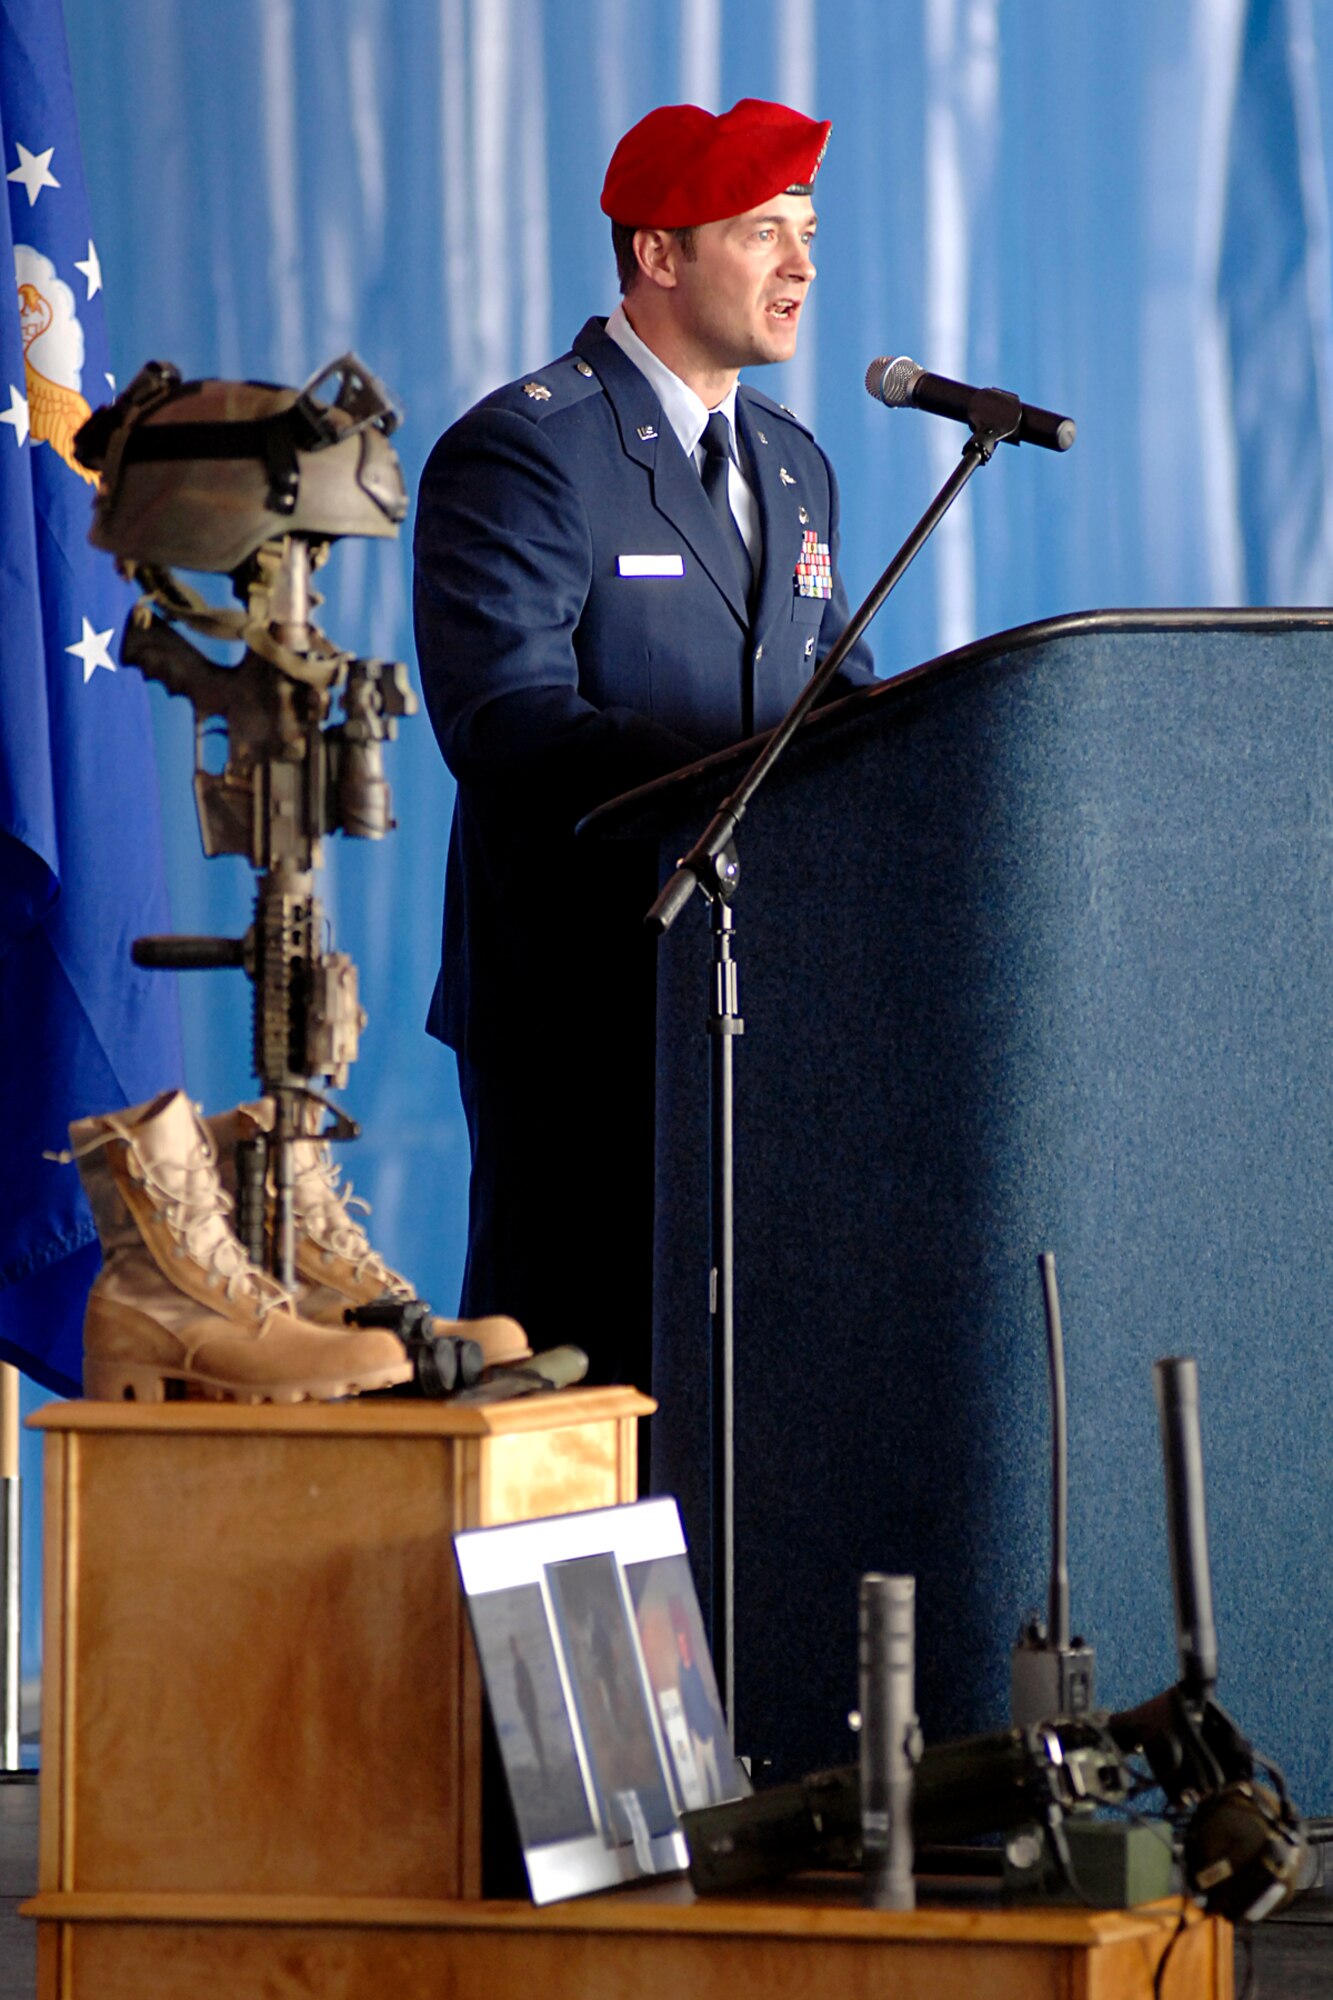 Lt. Col. Thaddeus Allen, 21st Special Tactics Squadron Commander, speaks during the memorial ceremony for Tech. Sgt. William Jefferson Jr., 21st STS, at Hangar 4 on Pope Air Force Base March 26. Sergeant Jefferson died in support of Operation Enduring Freedom March 22. (U.S. Air Force Photo by Mike Murchison)